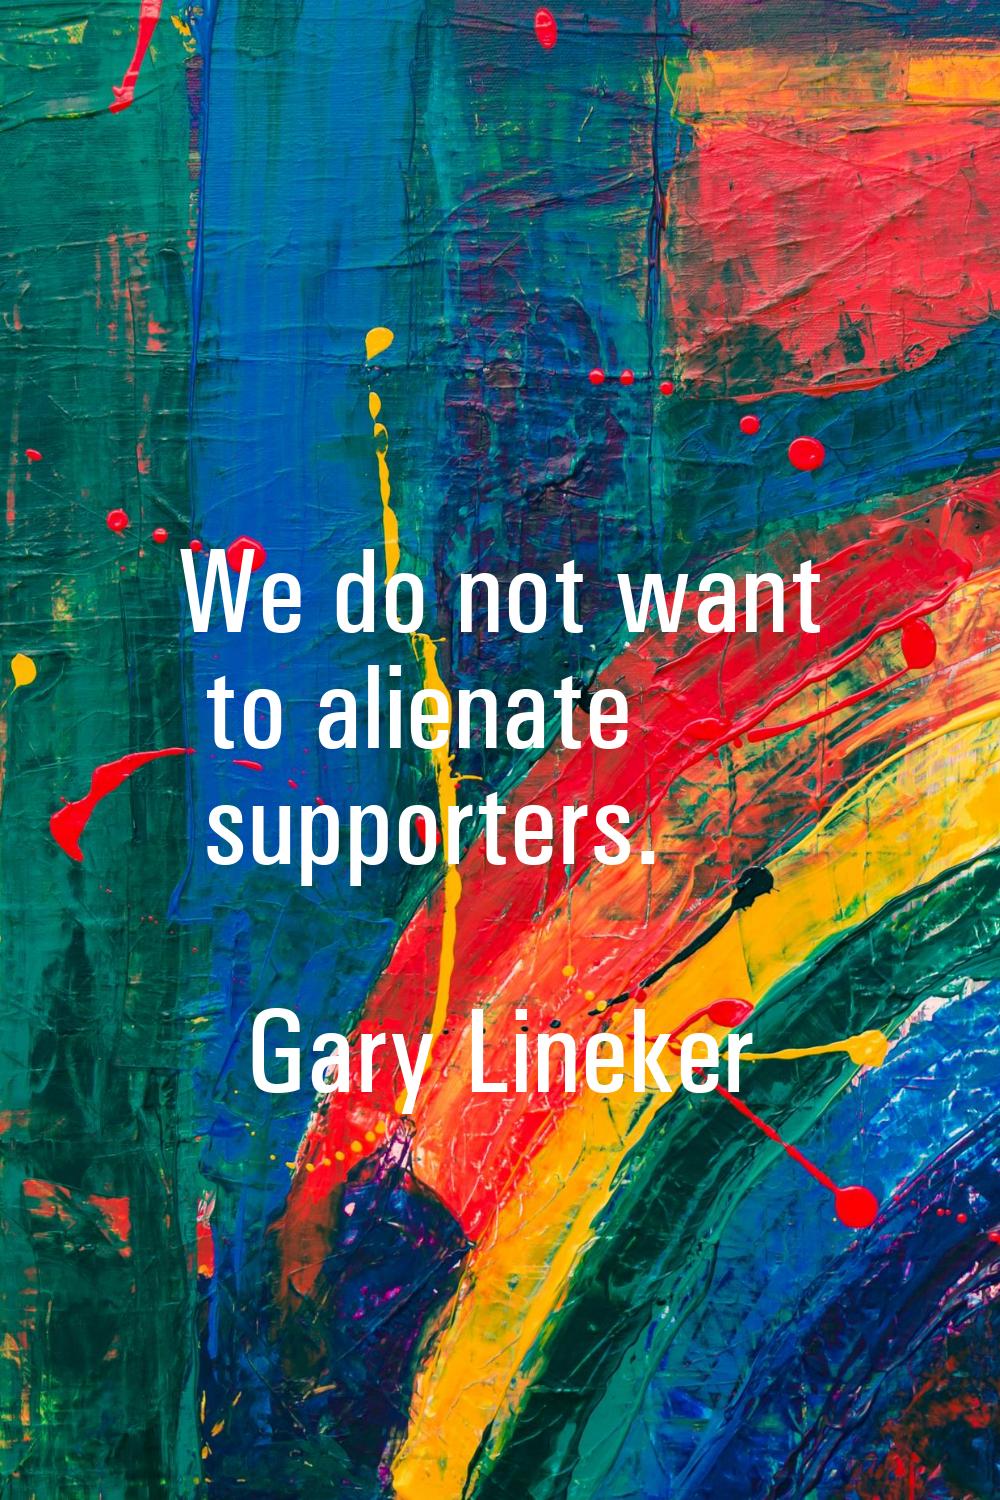 We do not want to alienate supporters.